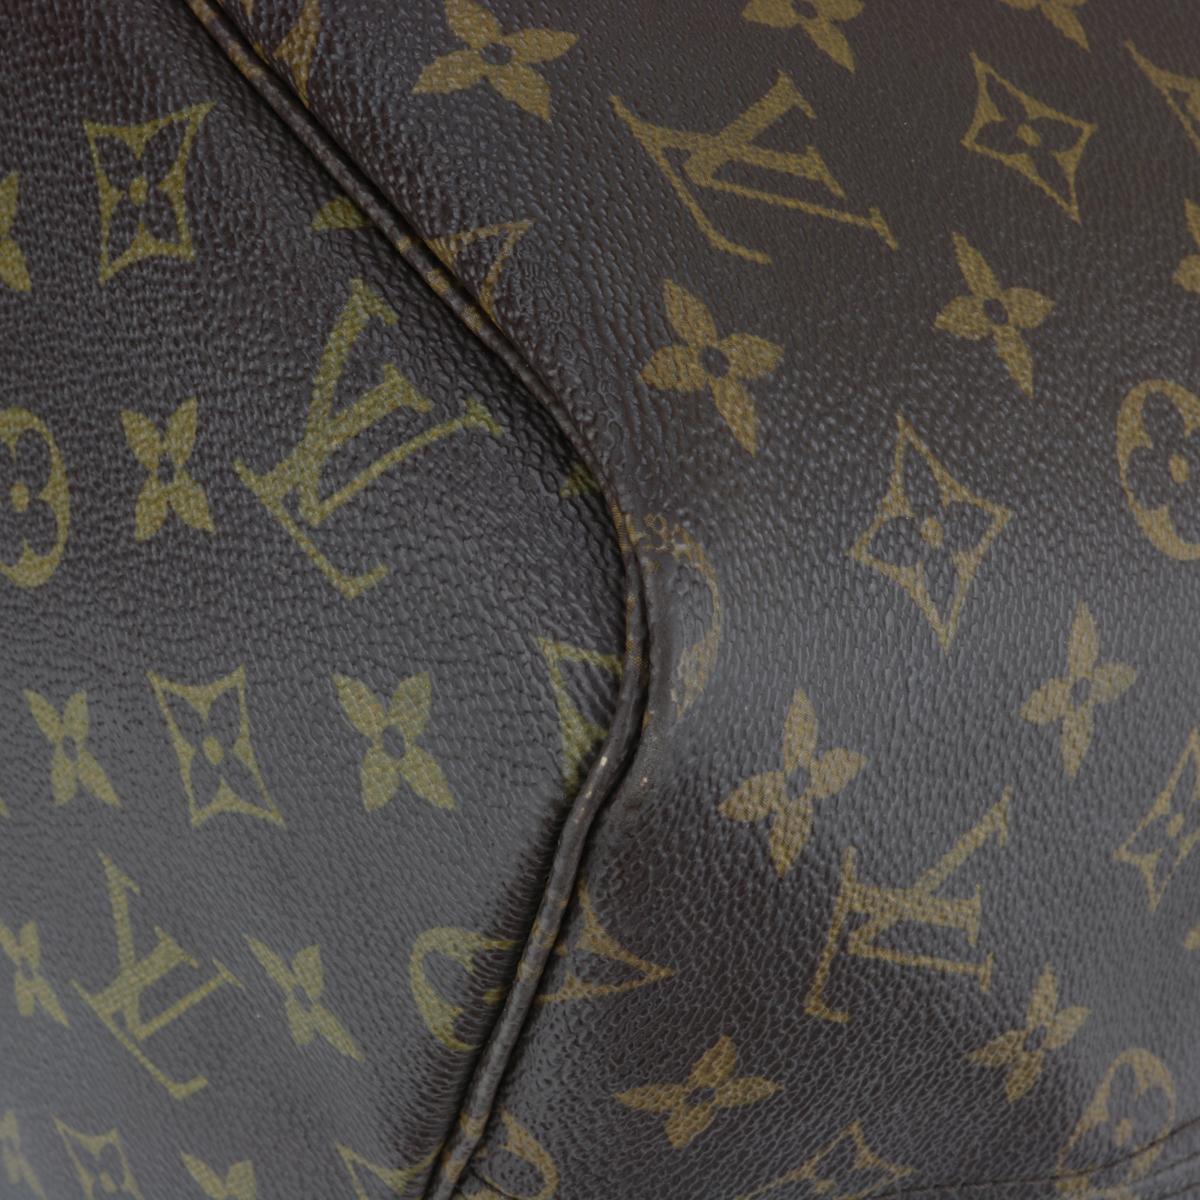 Louis Vuitton Neverfull GM Bag in Monogram with Beige Interior 2007 5